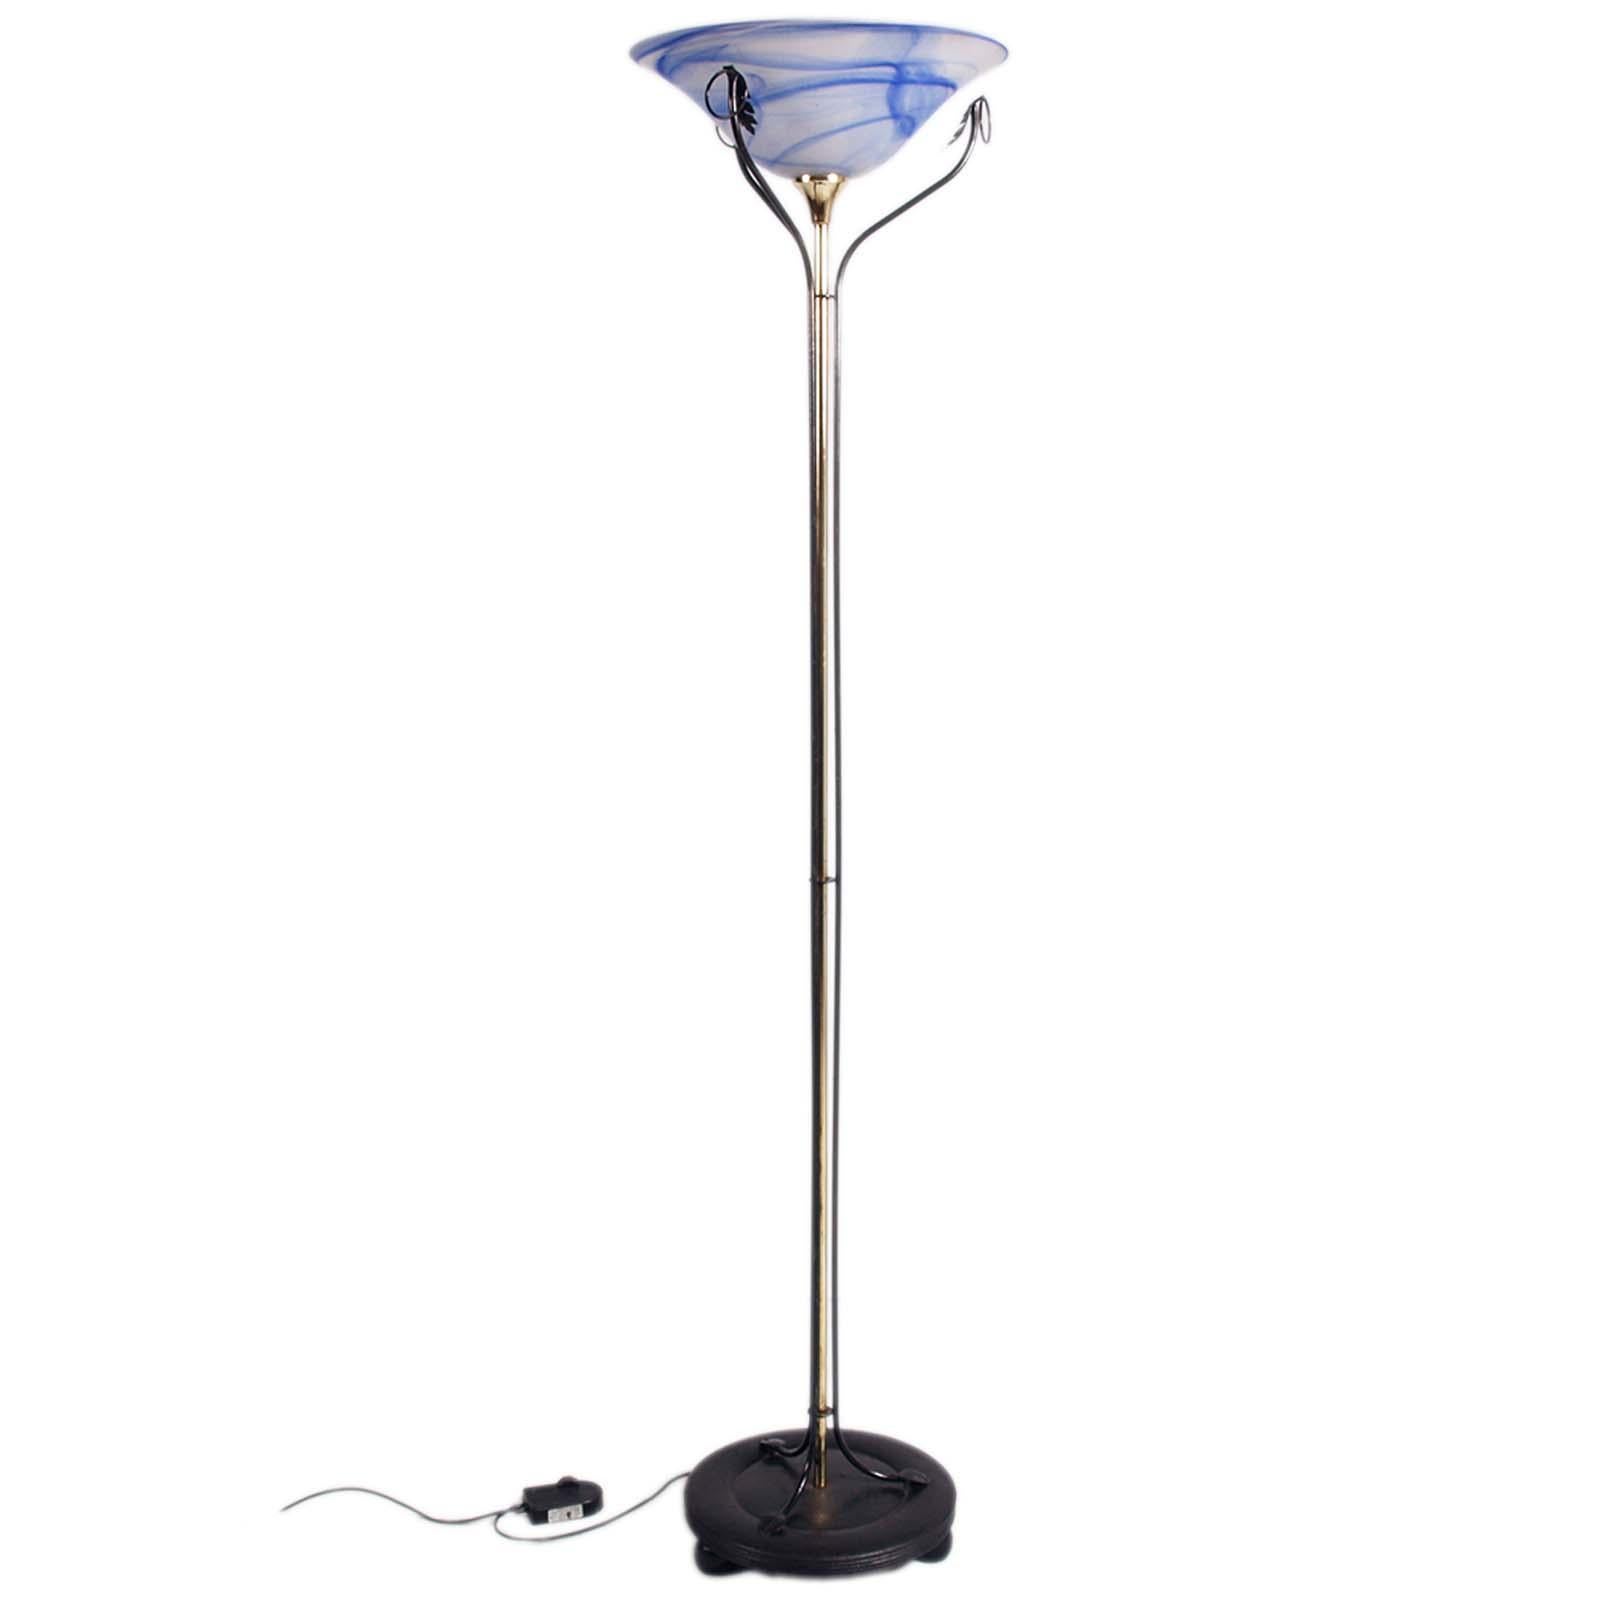 1950s Art Deco floor lamp in the shape of an Olympic brazier with Murano glass lampshade.
Turned wooden base on three spherical legs; vertical iron structure ending with three leaves with a central part in golden metal